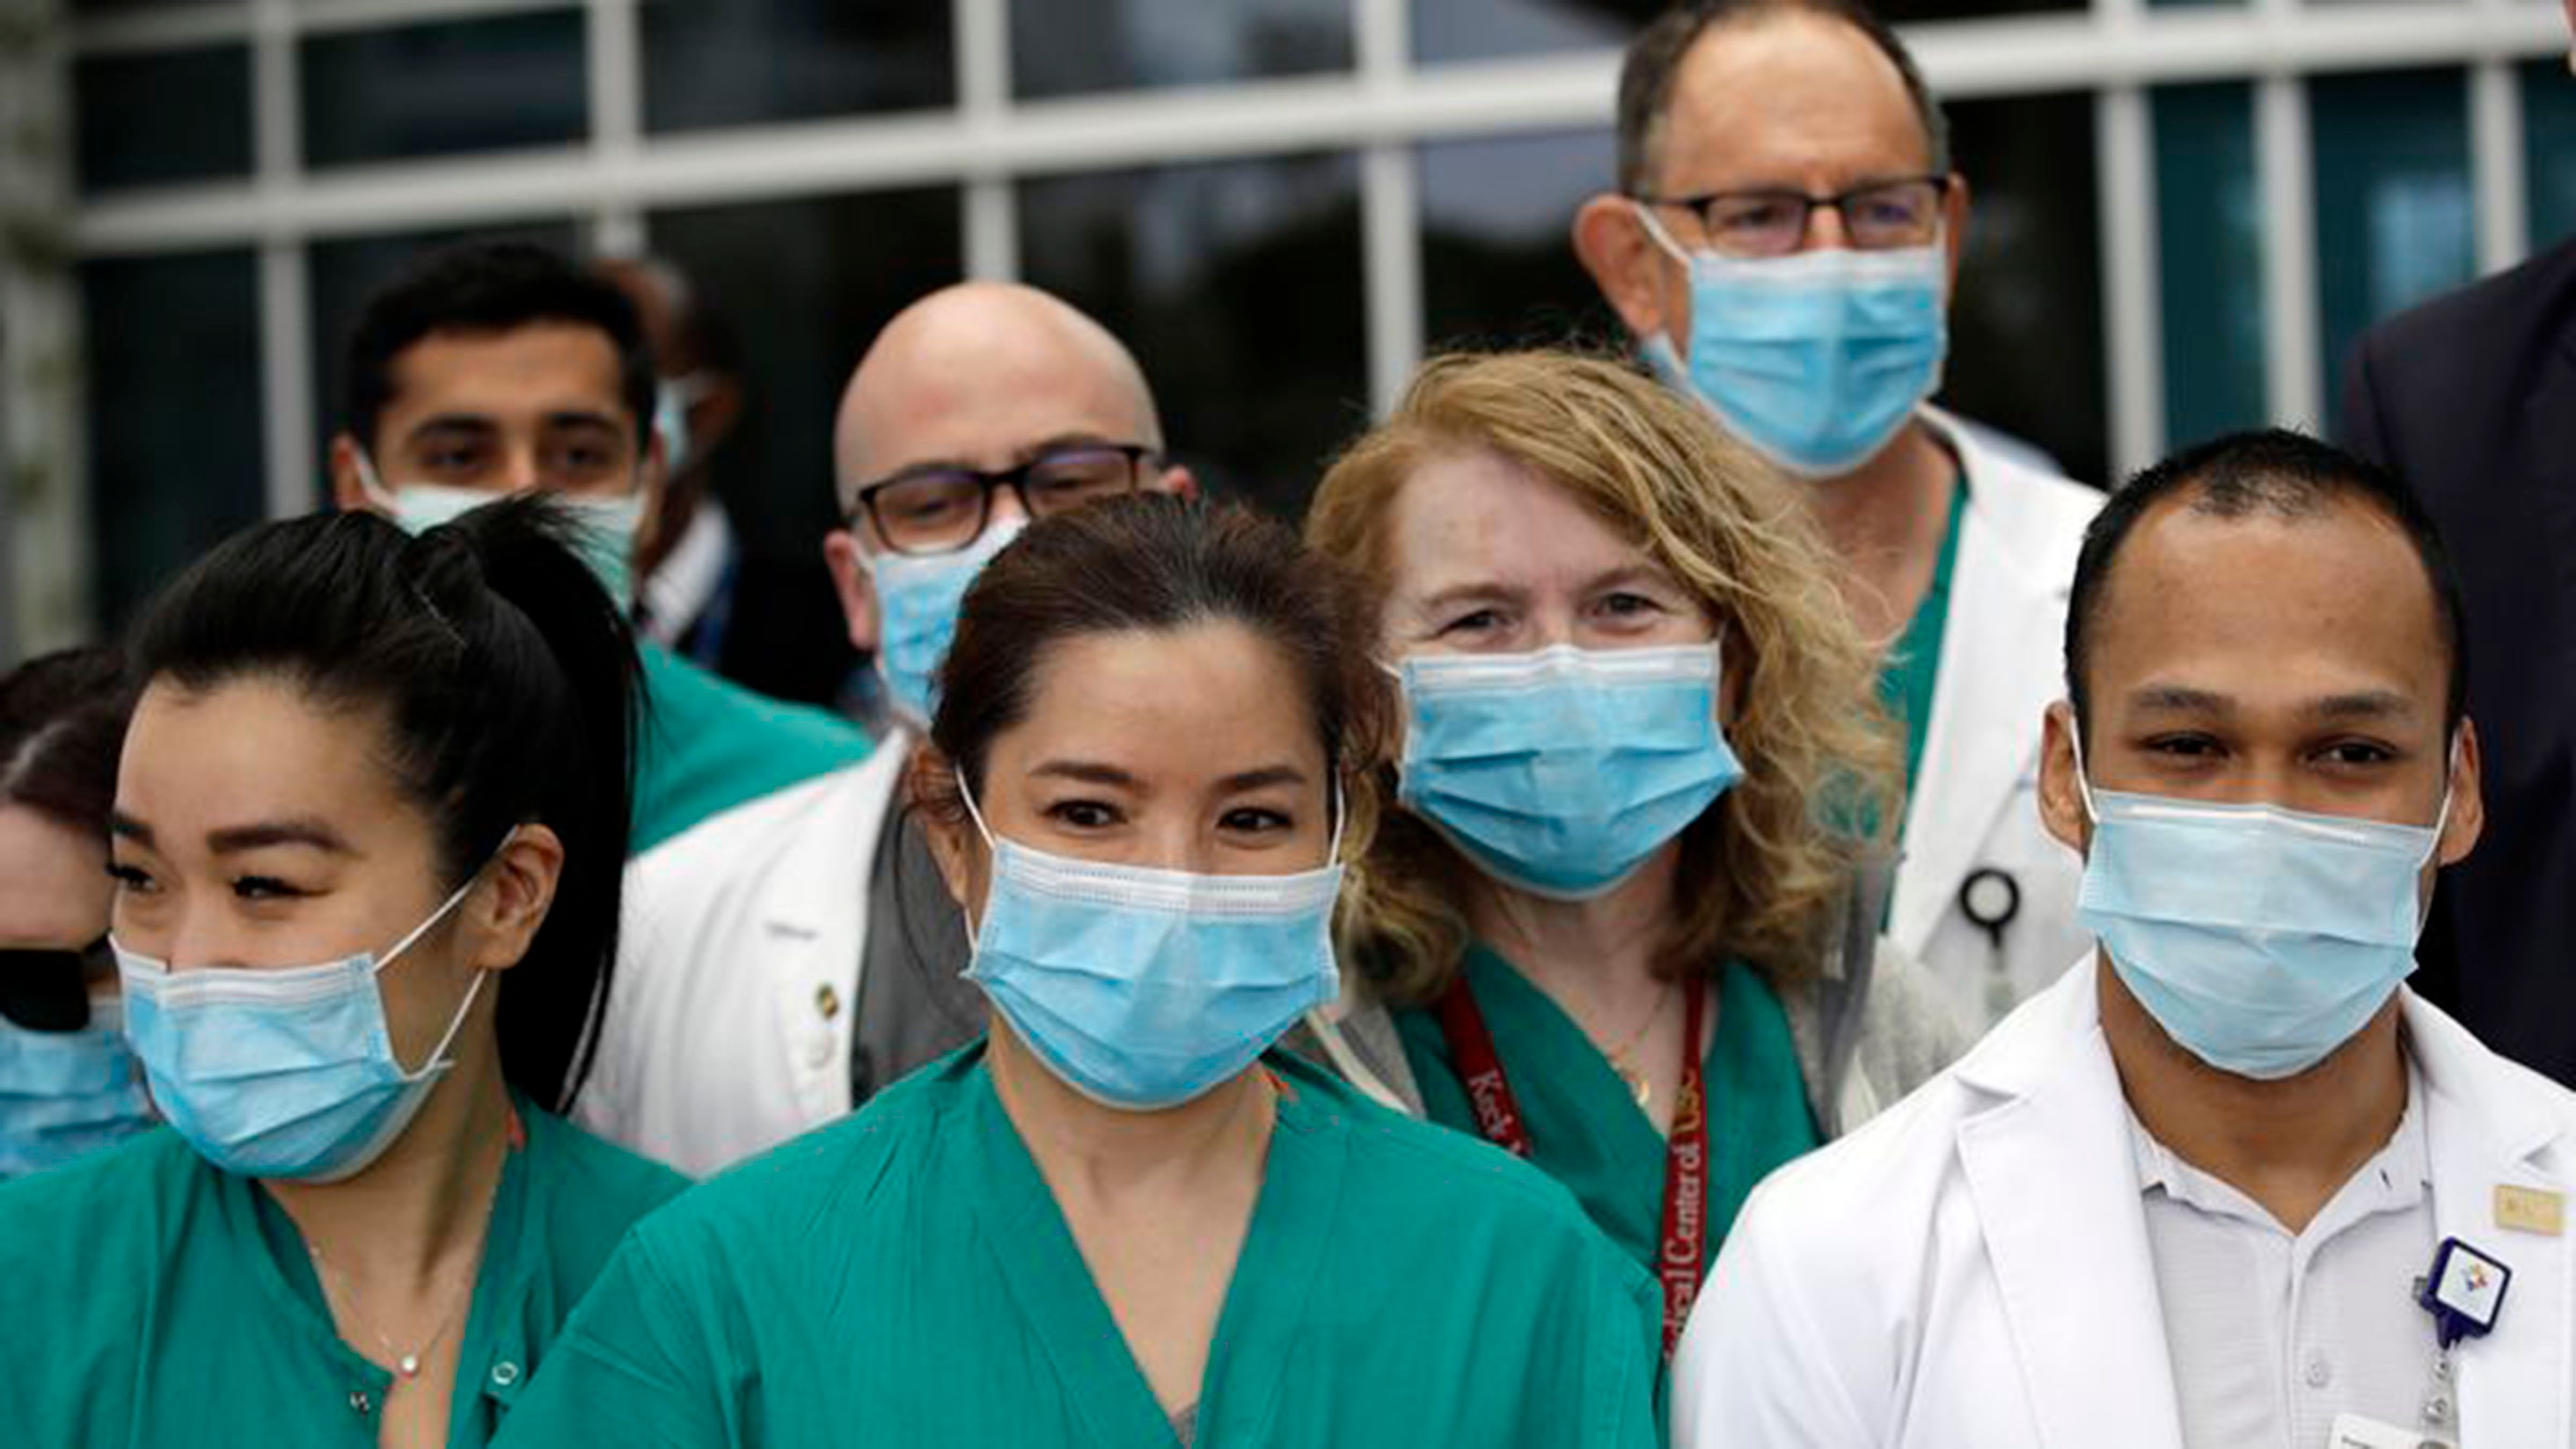 Healthcare workers deserve support amid pandemic